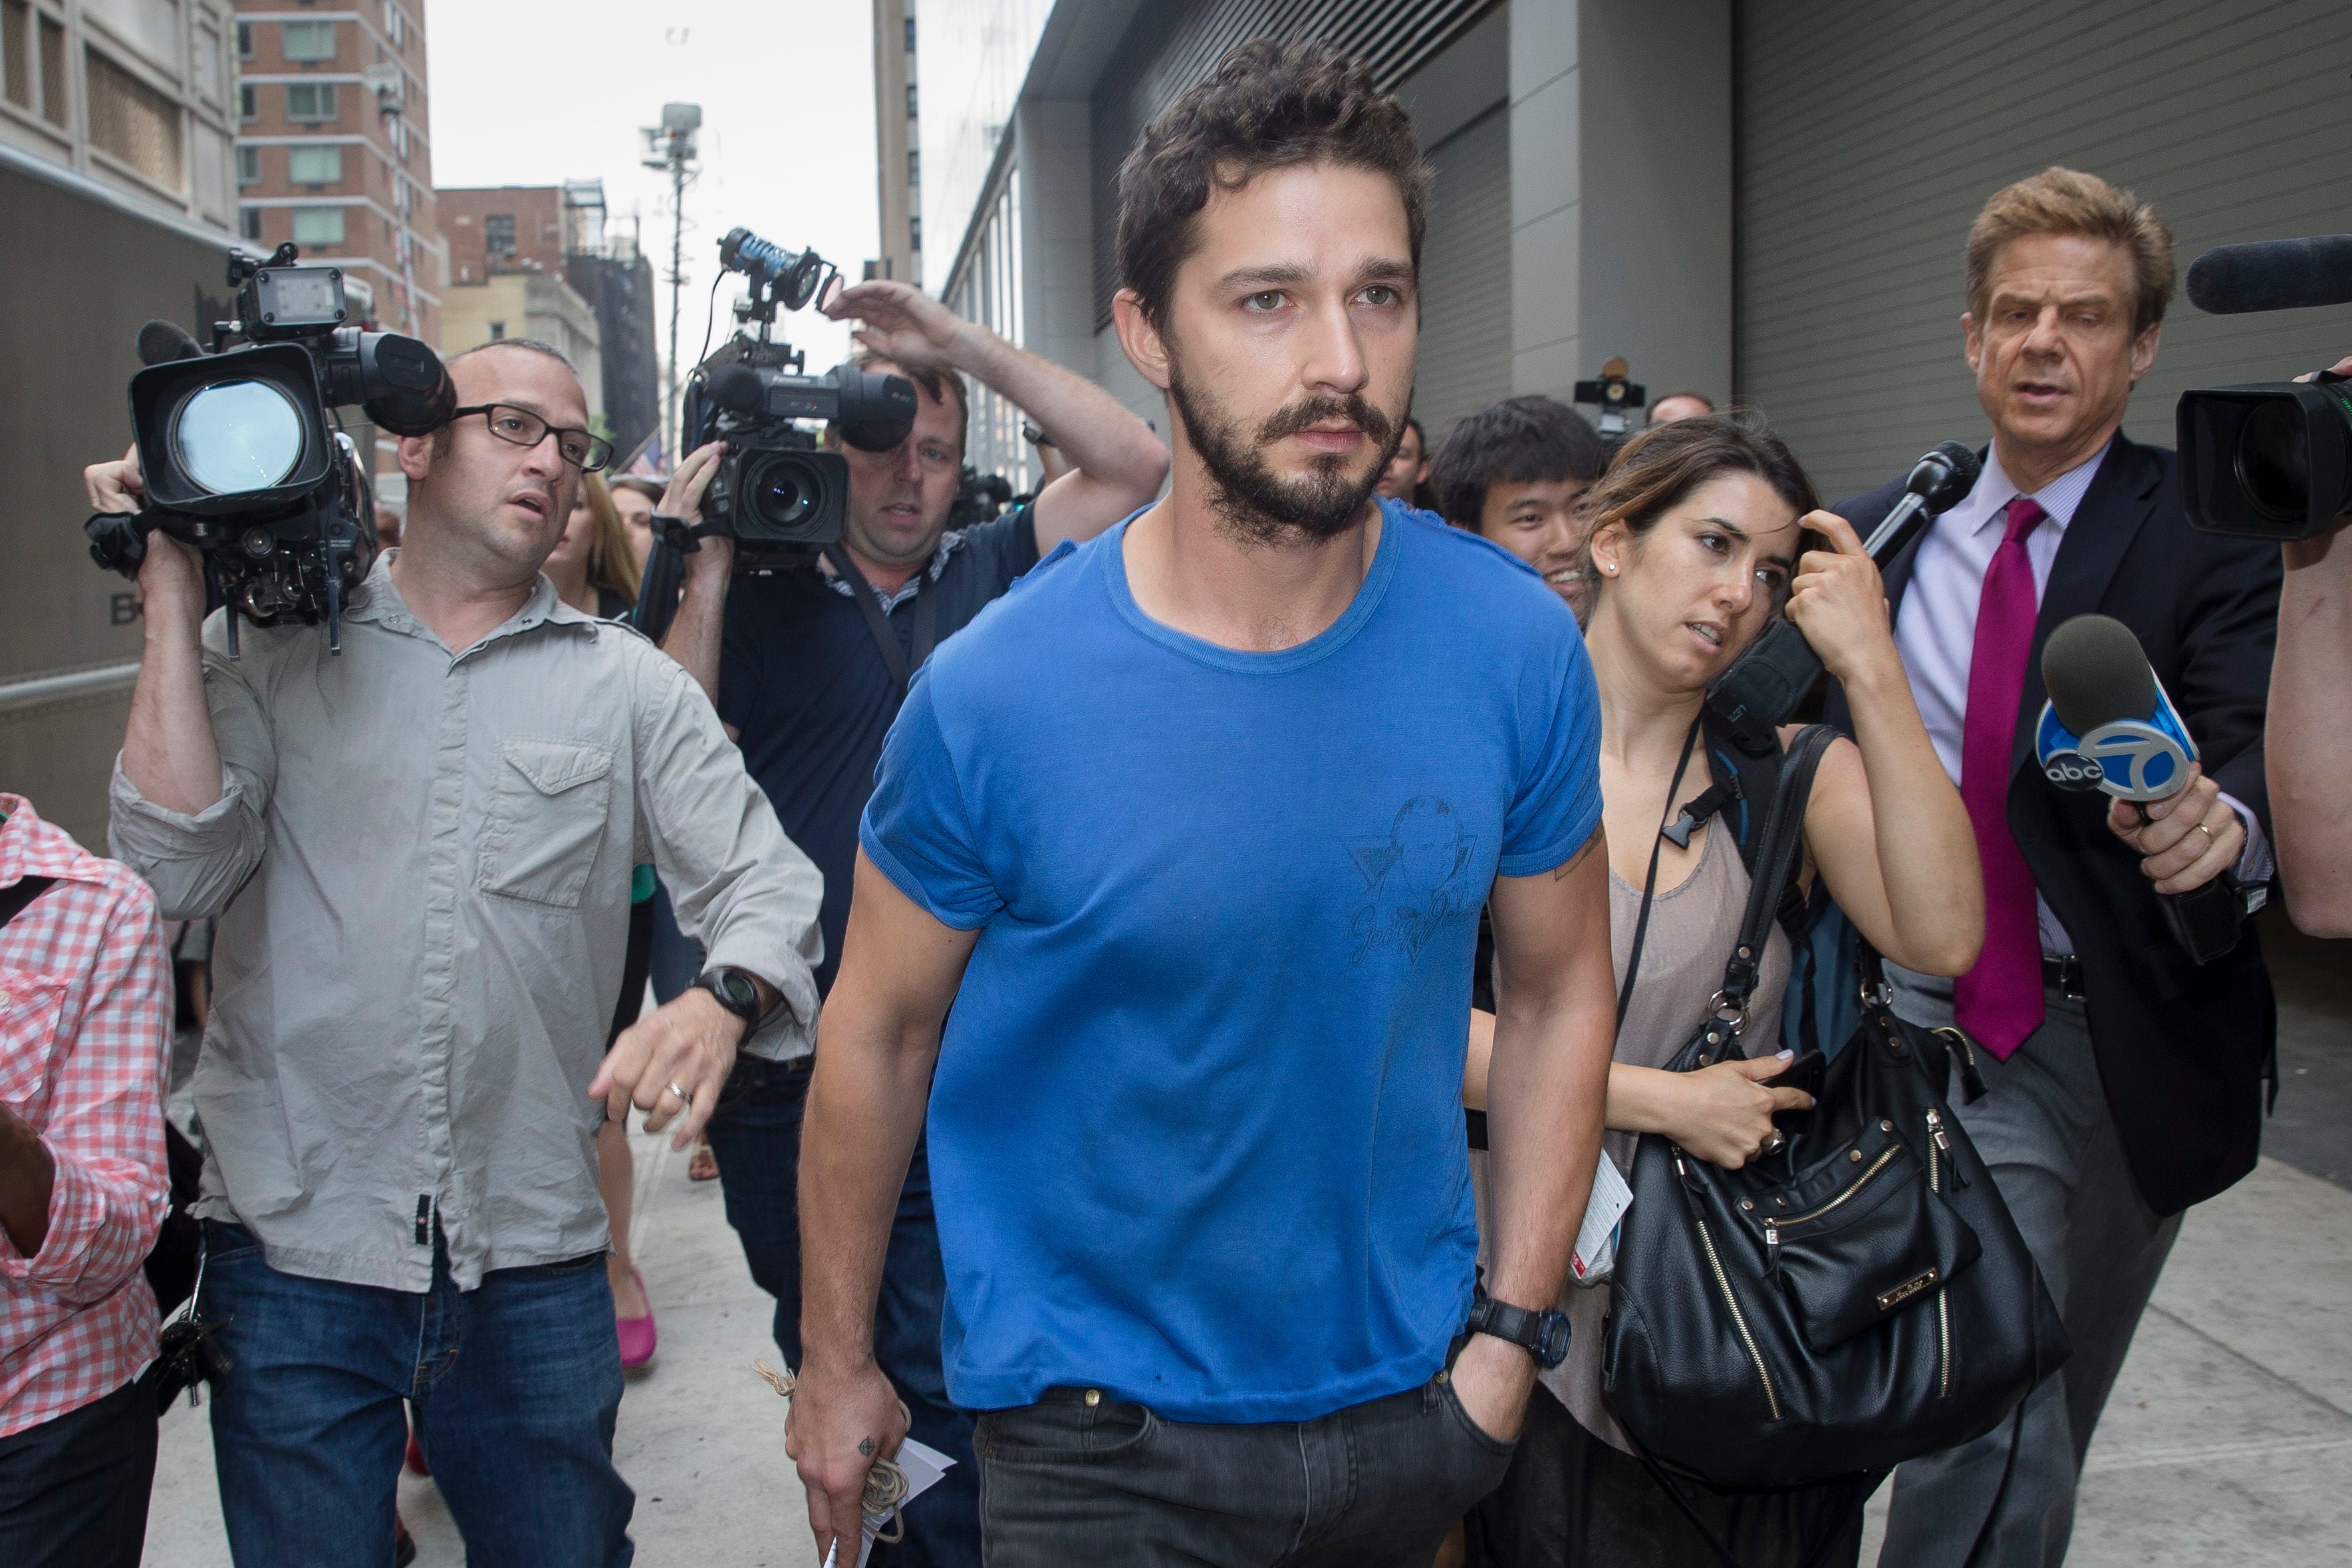 Actor Shia LaBeouf walks through the media after leaving Midtown Community Court following his arrest the previous day for yelling obscenities at the Broadway show "Cabaret," Friday, June 27, 2014, in New York. The 28-year-old star of the "Transformers" franchise faces charges that include disorderly conduct and criminal trespass.  (AP Photo/John Minchillo)